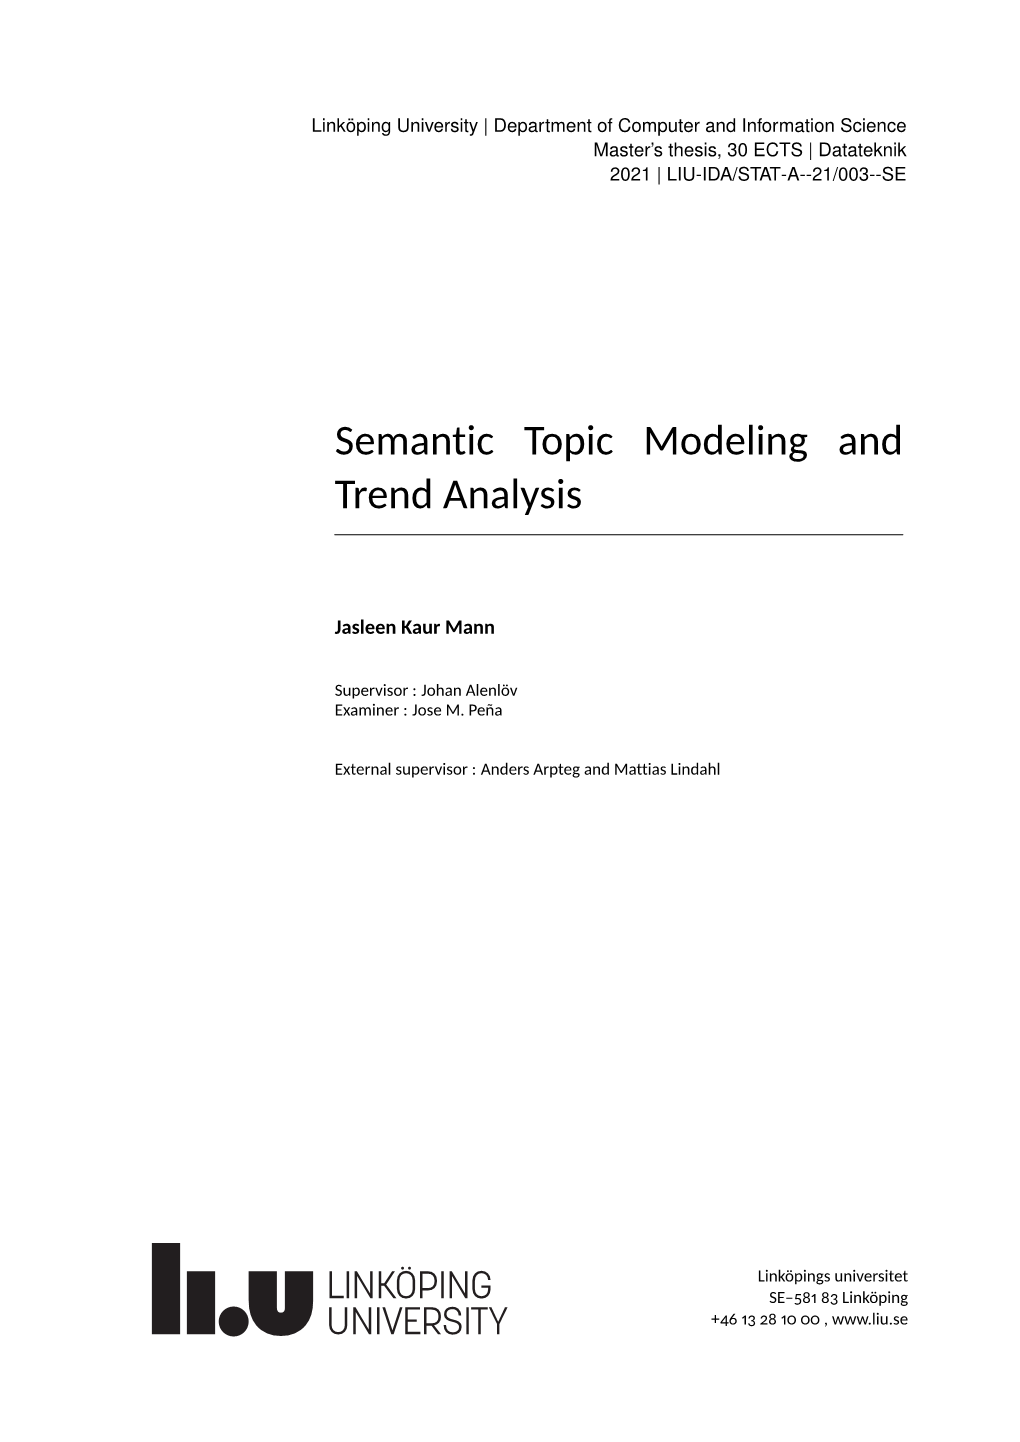 Semantic Topic Modeling and Trend Analysis